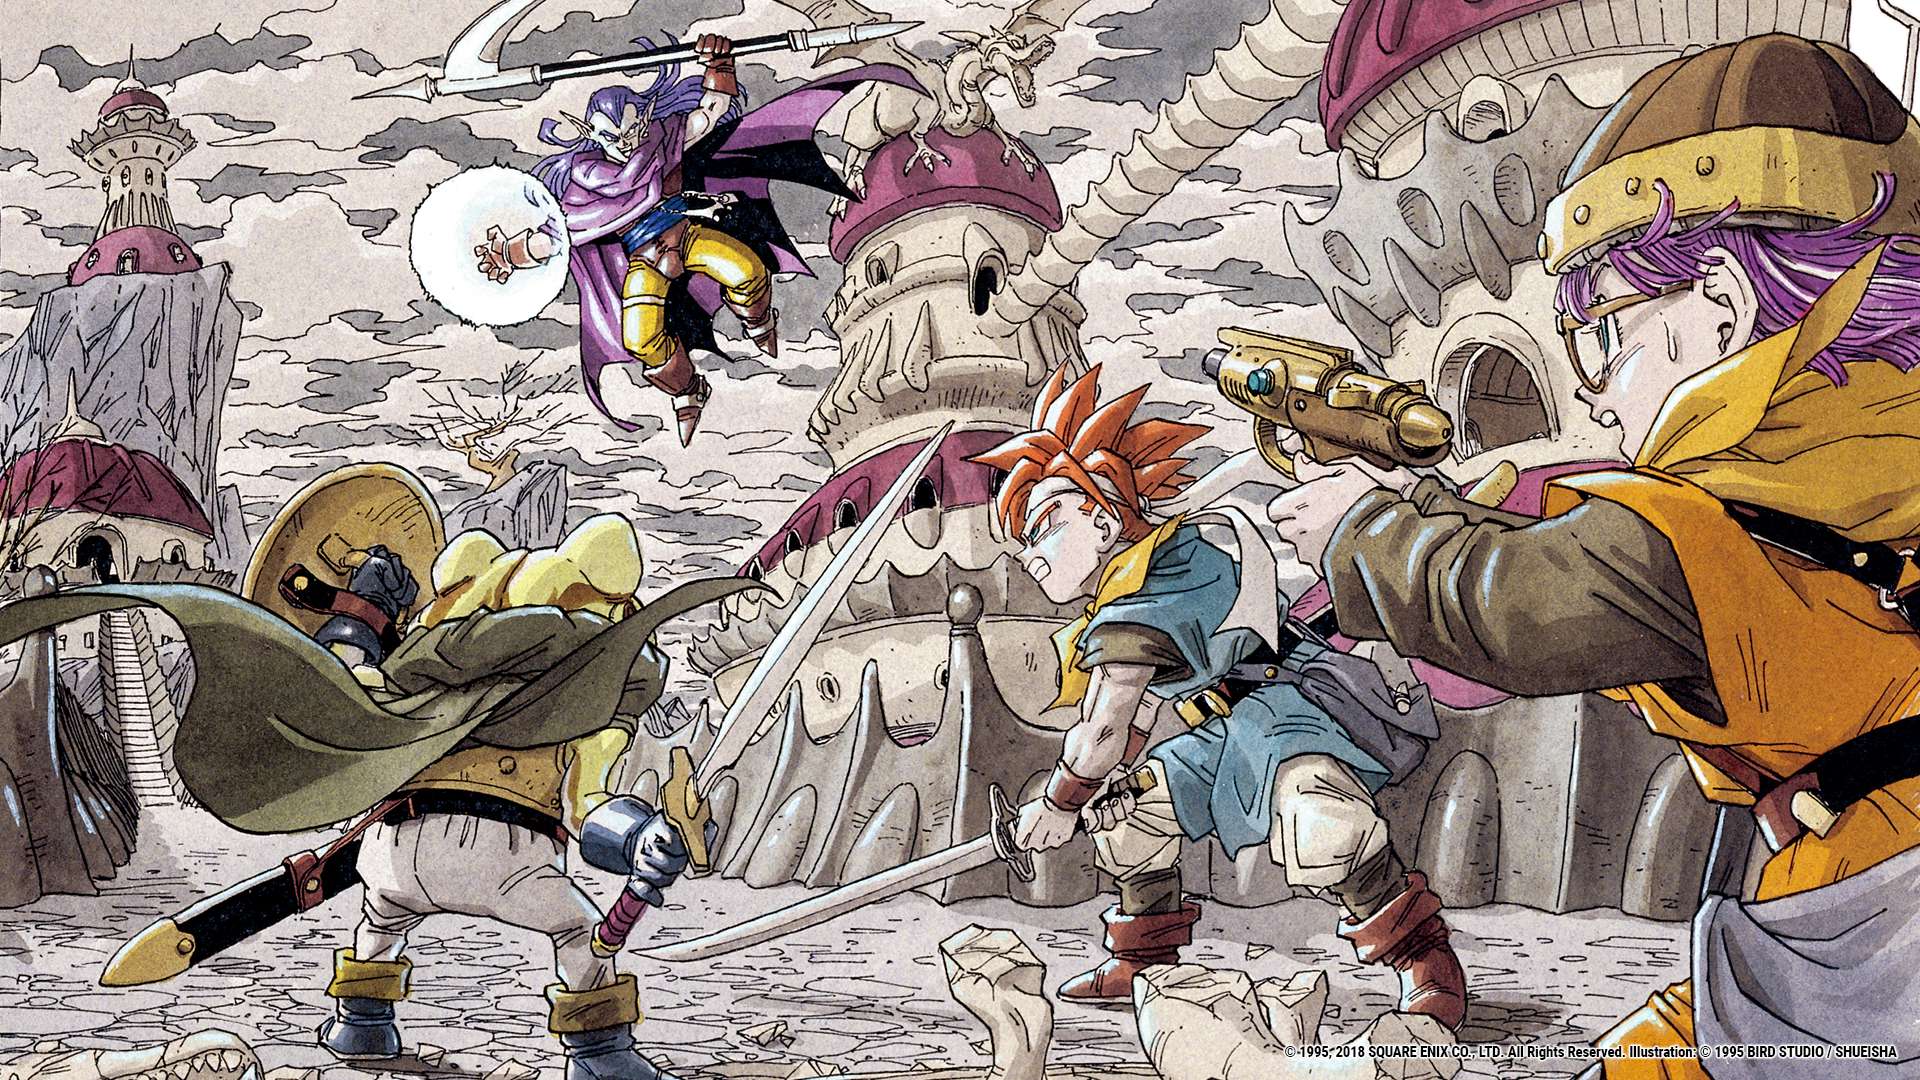 download chrono trigger limited edition pc